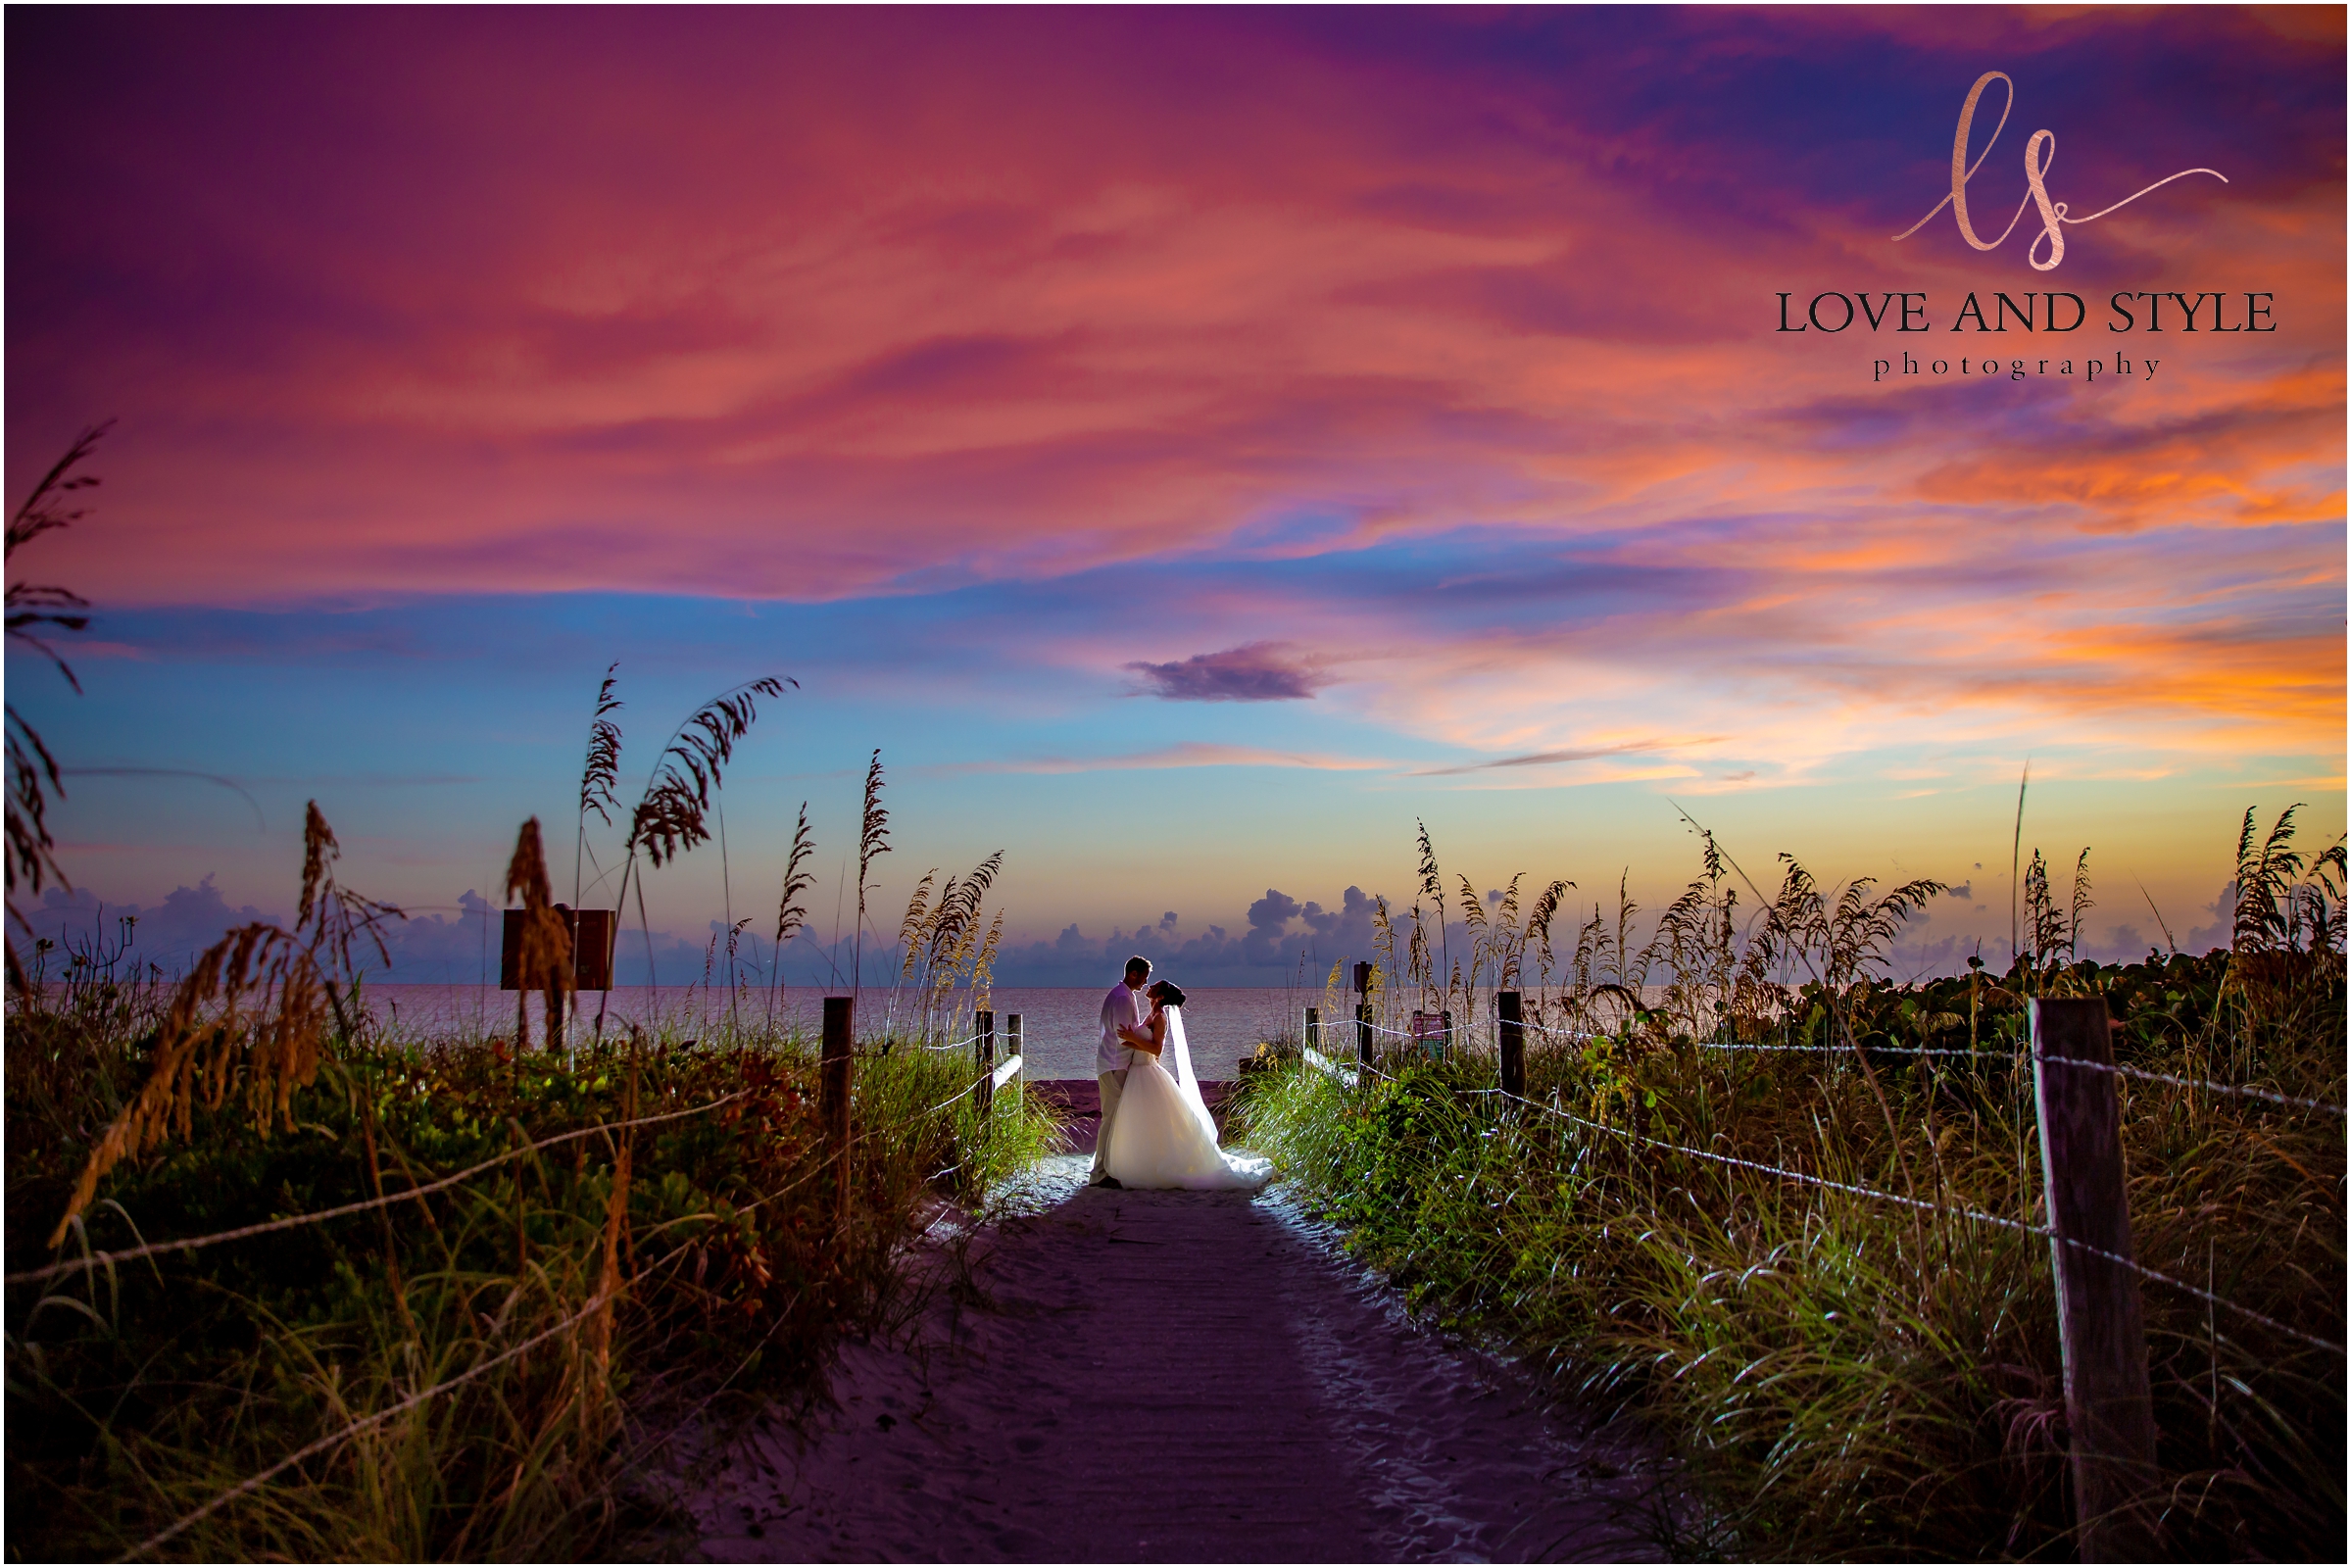 Englewood Beach Wedding by The Waverly bride and groom at sunset